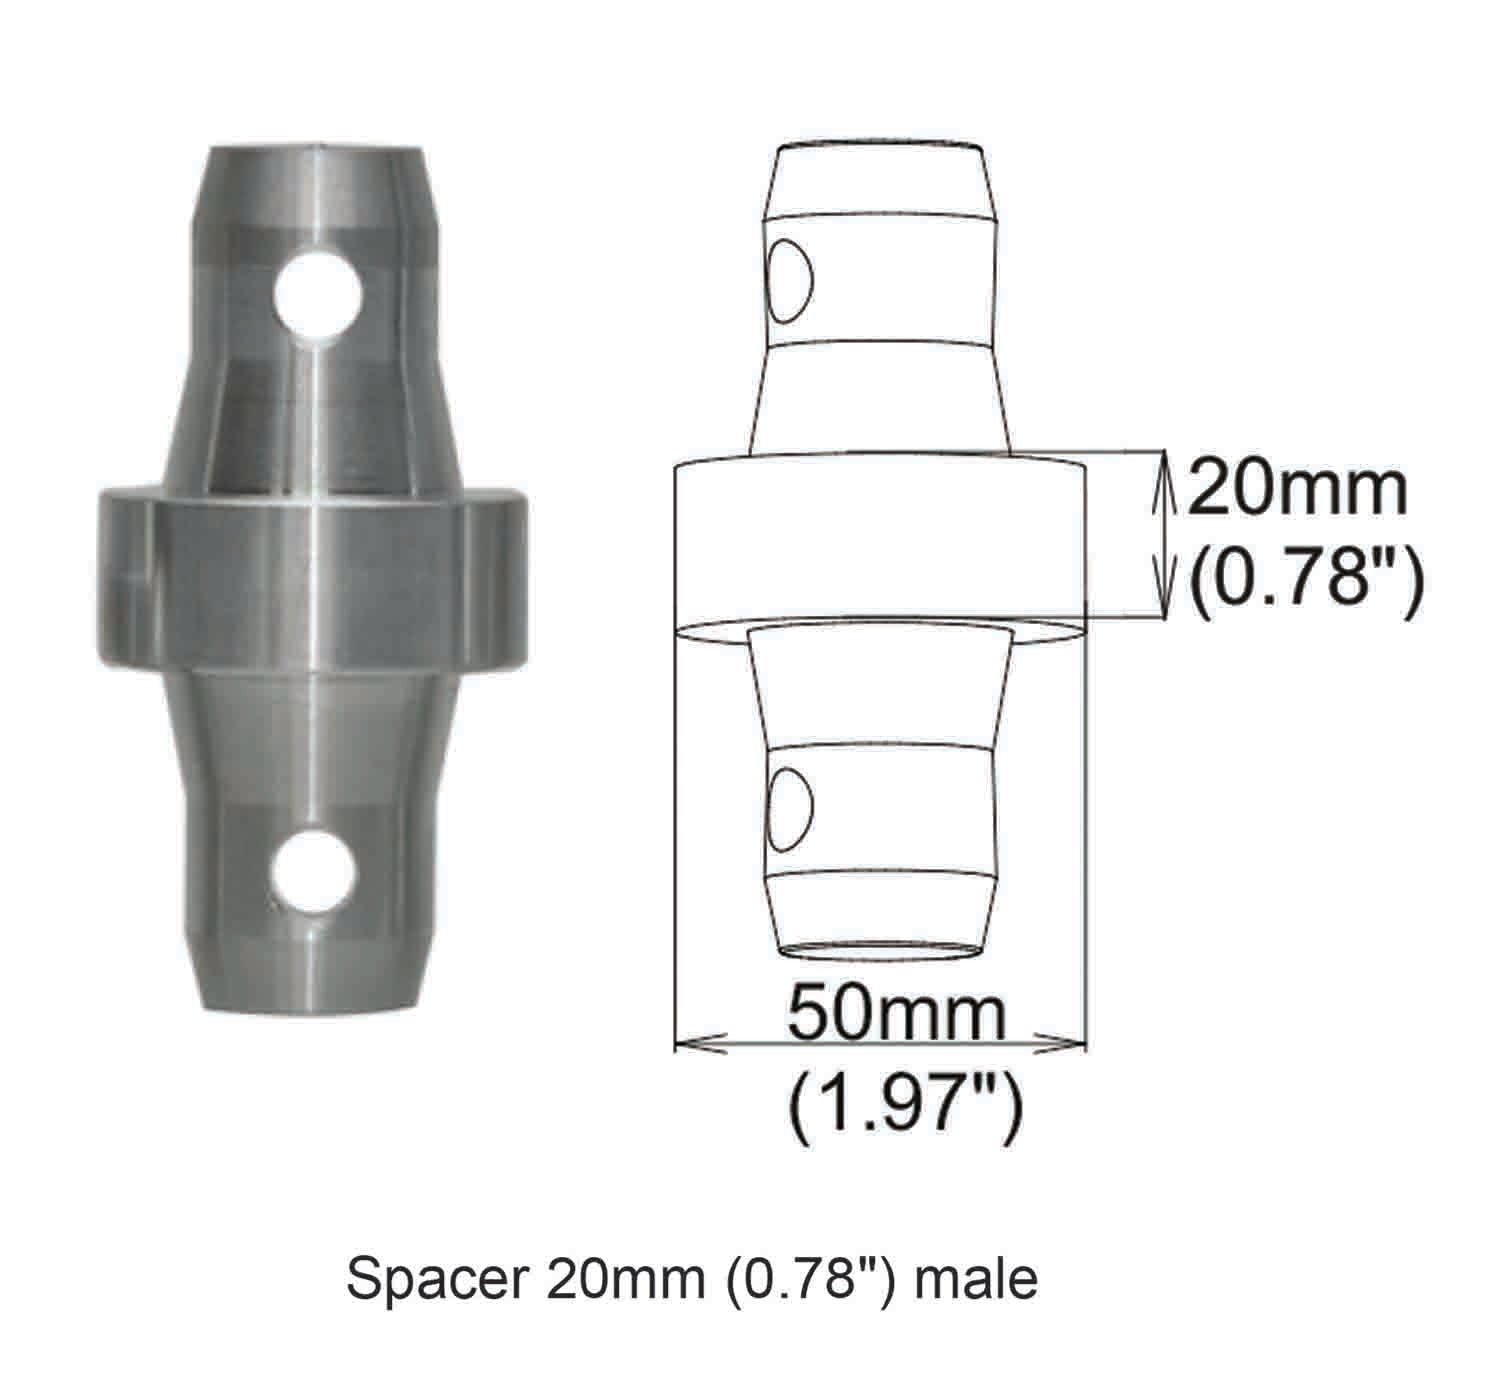 ProX XT-SPMM20 Spacer 20mm Male Coupler - Hollywood DJ